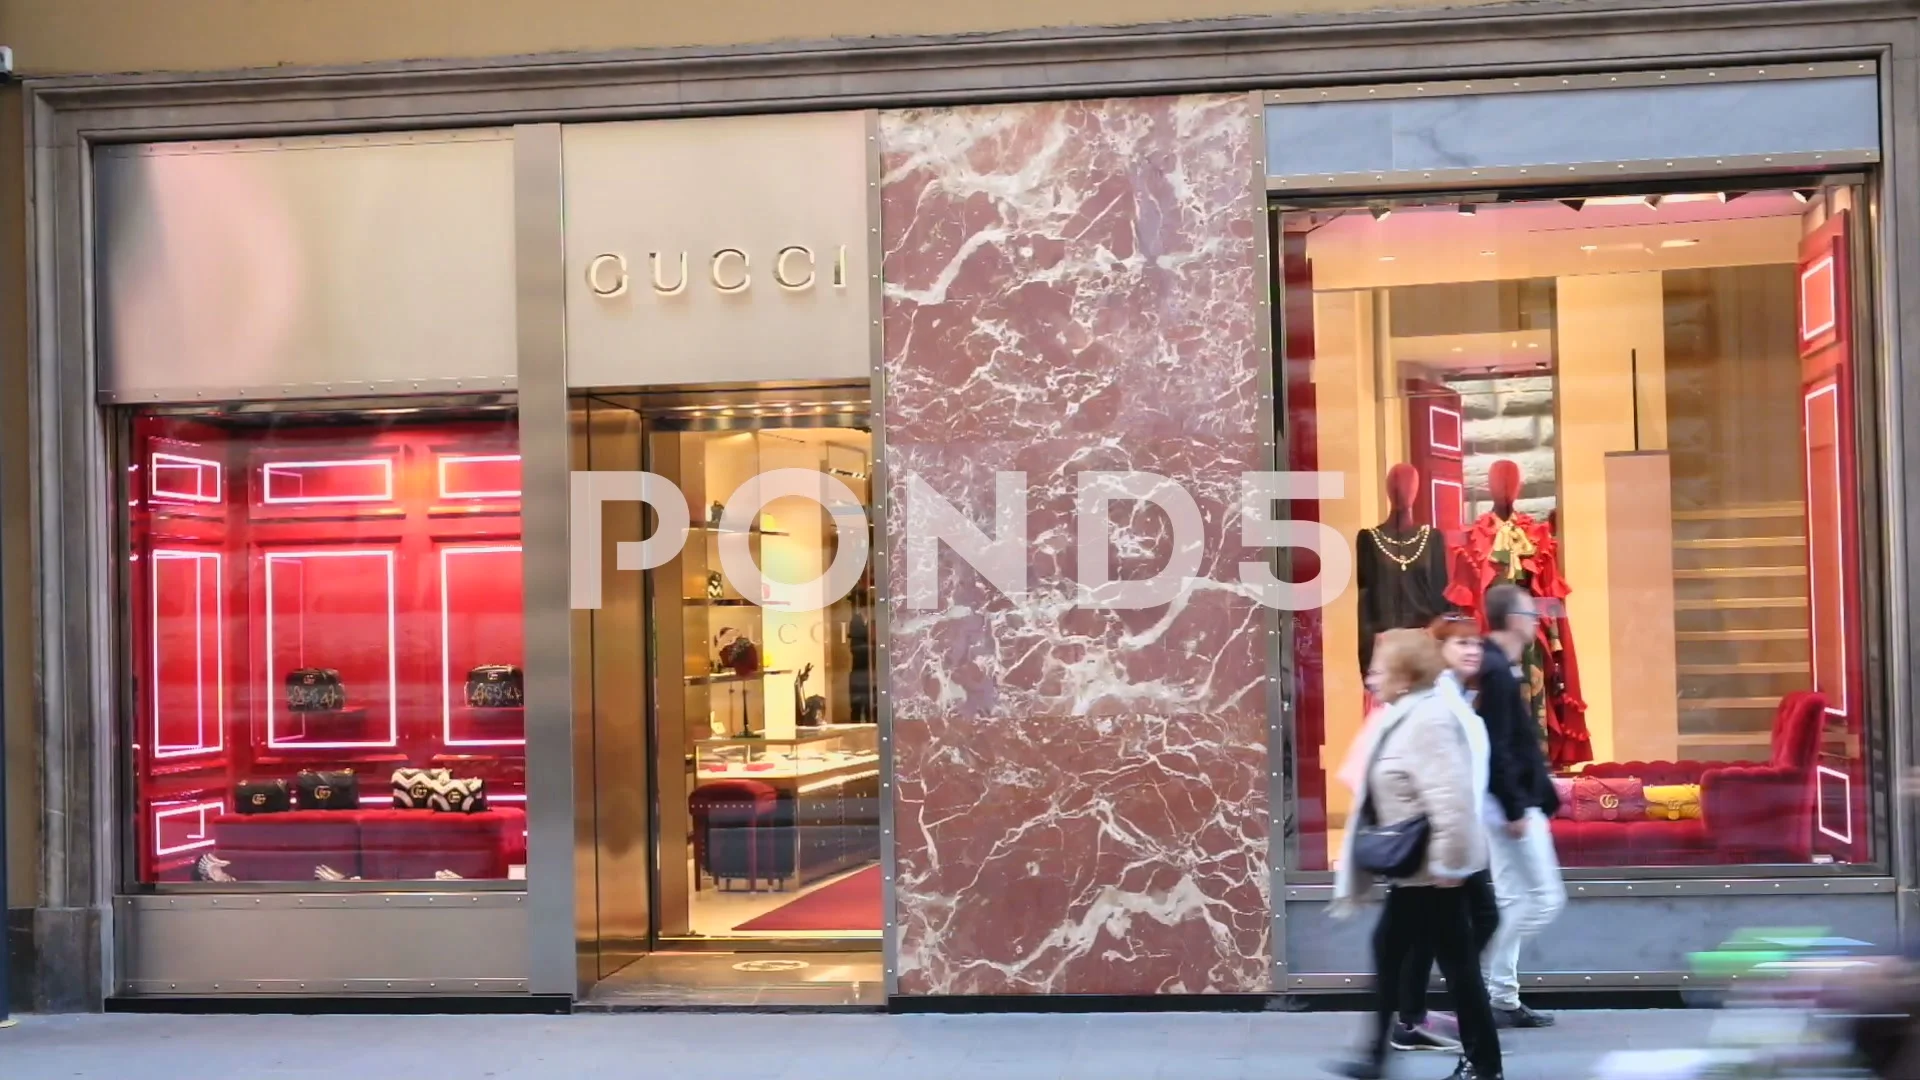 Gucci Shop Window Display At Night Via De Tornabuoni Florence Stock Photo -  Download Image Now - iStock